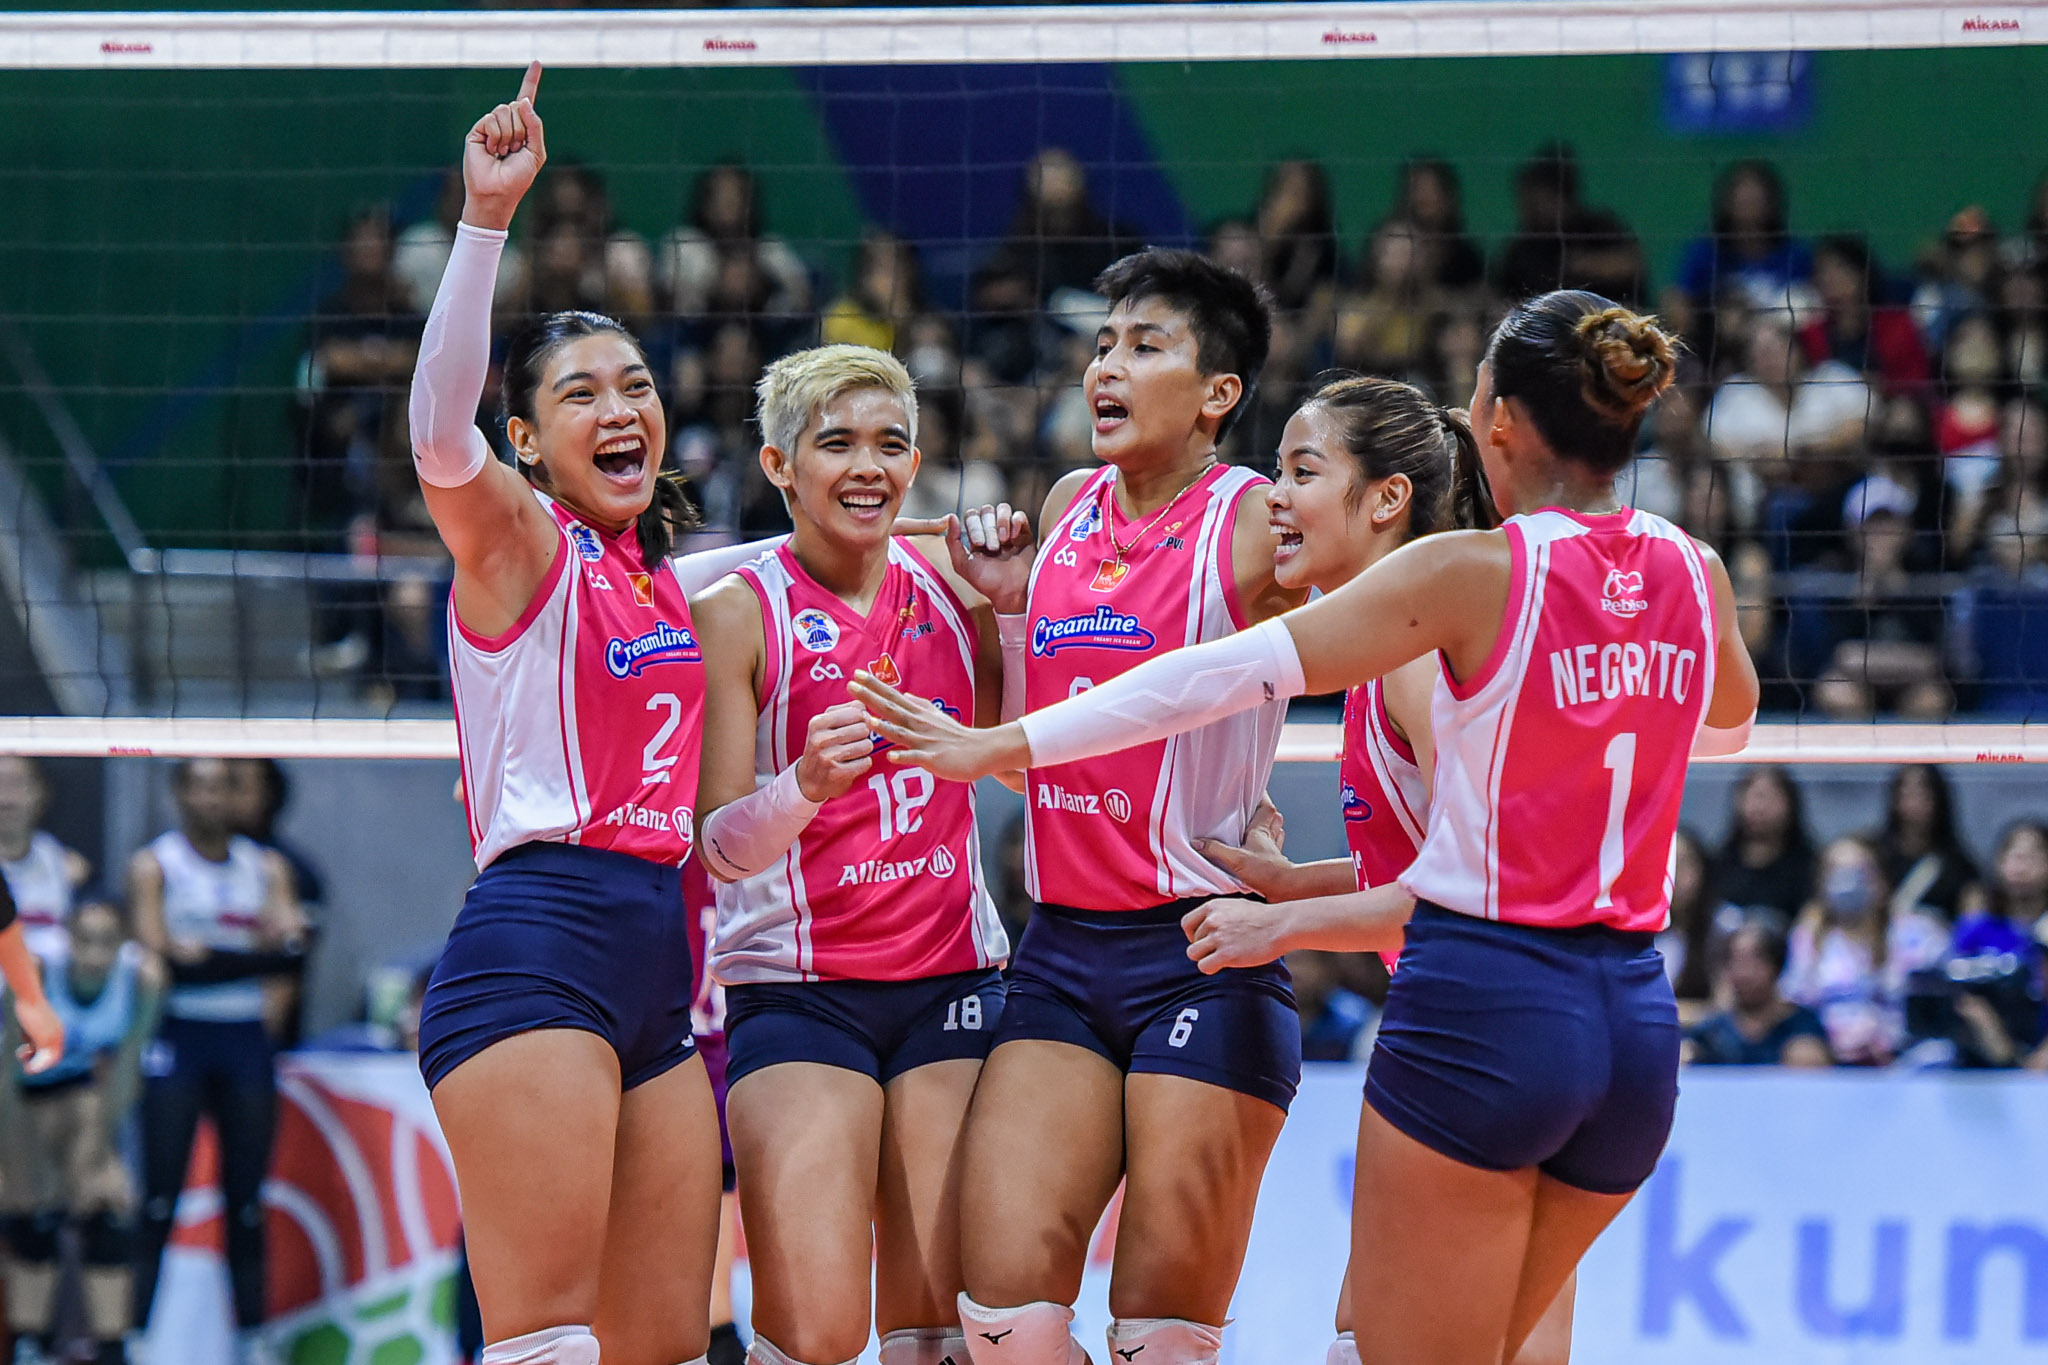 PVL-AFC-Finals-Creamline-vs.-Choco-Mucho-G2-3123 Alex Eala surprised by ovation received from PVL fans News PVL Tennis Volleyball  - philippine sports news